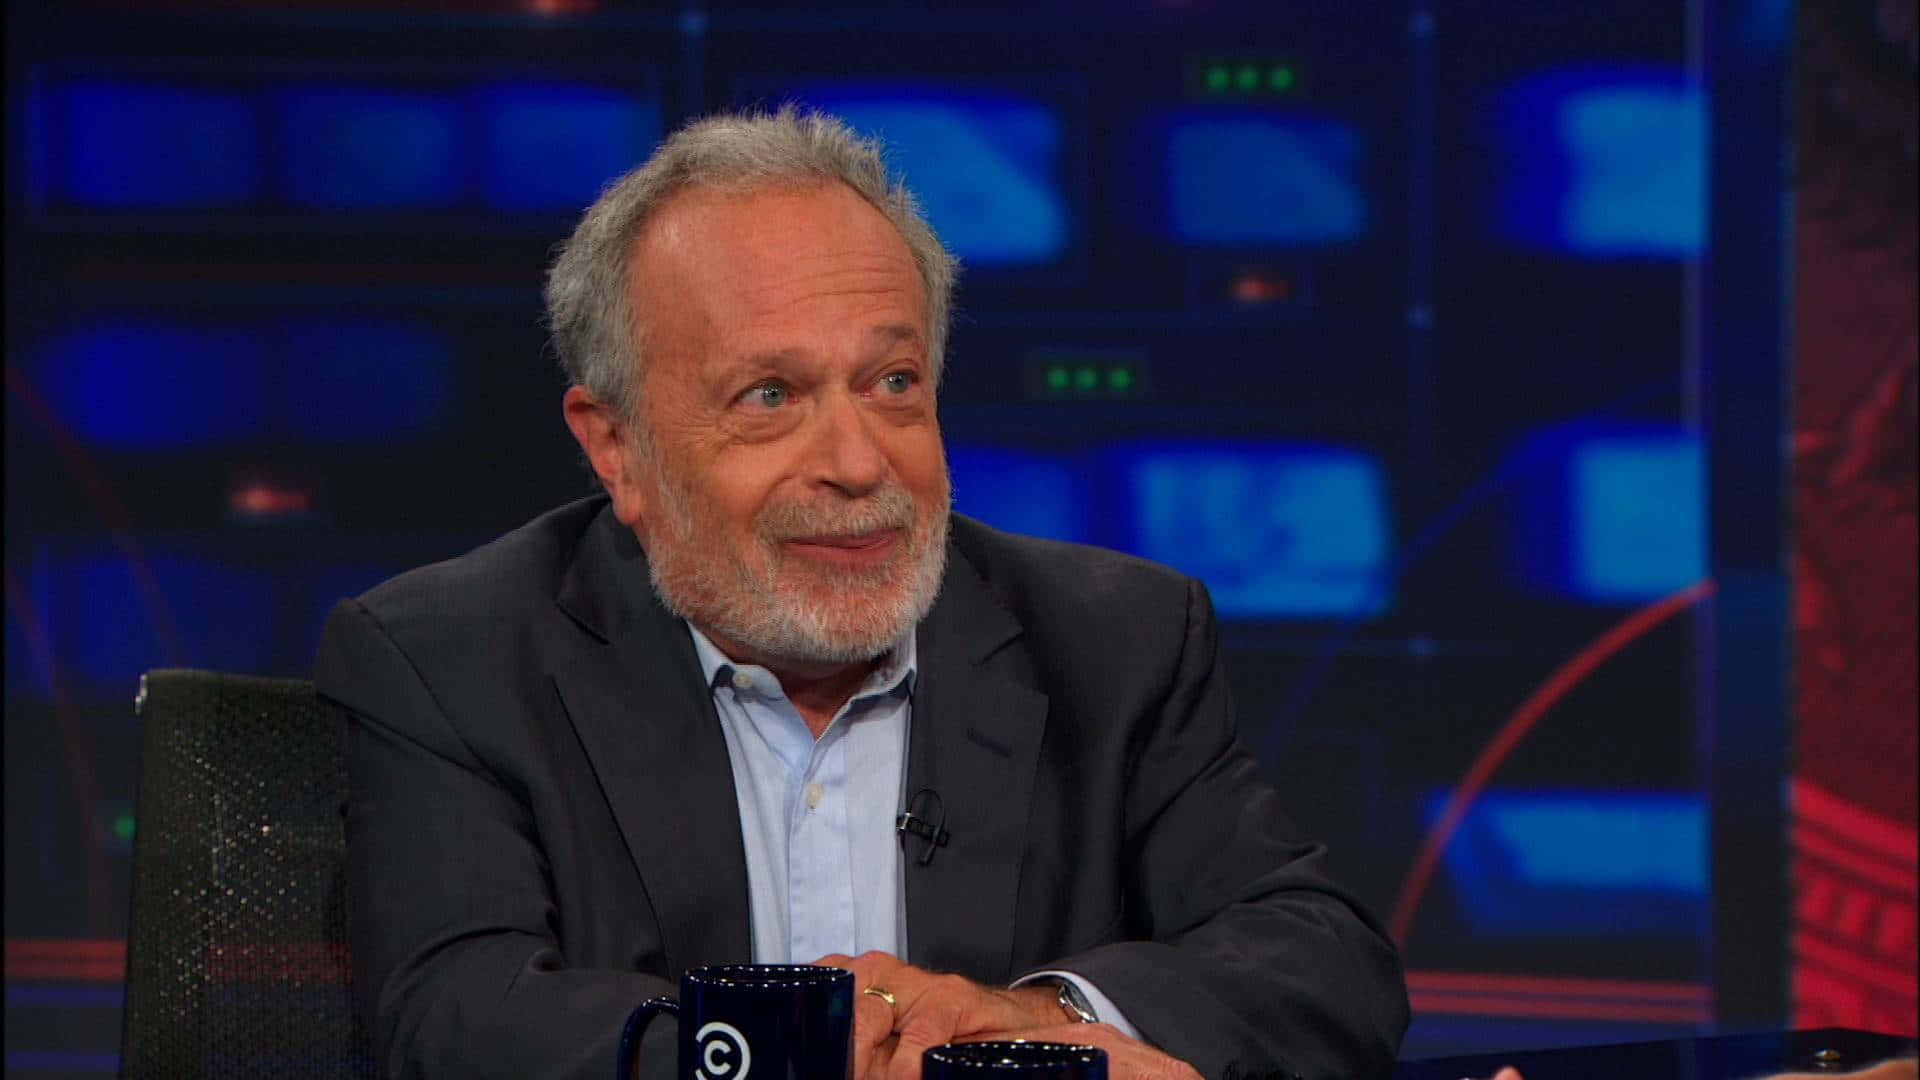 Robert Reich Delivering A Knowledge-packed Economic Lecture. Wallpaper